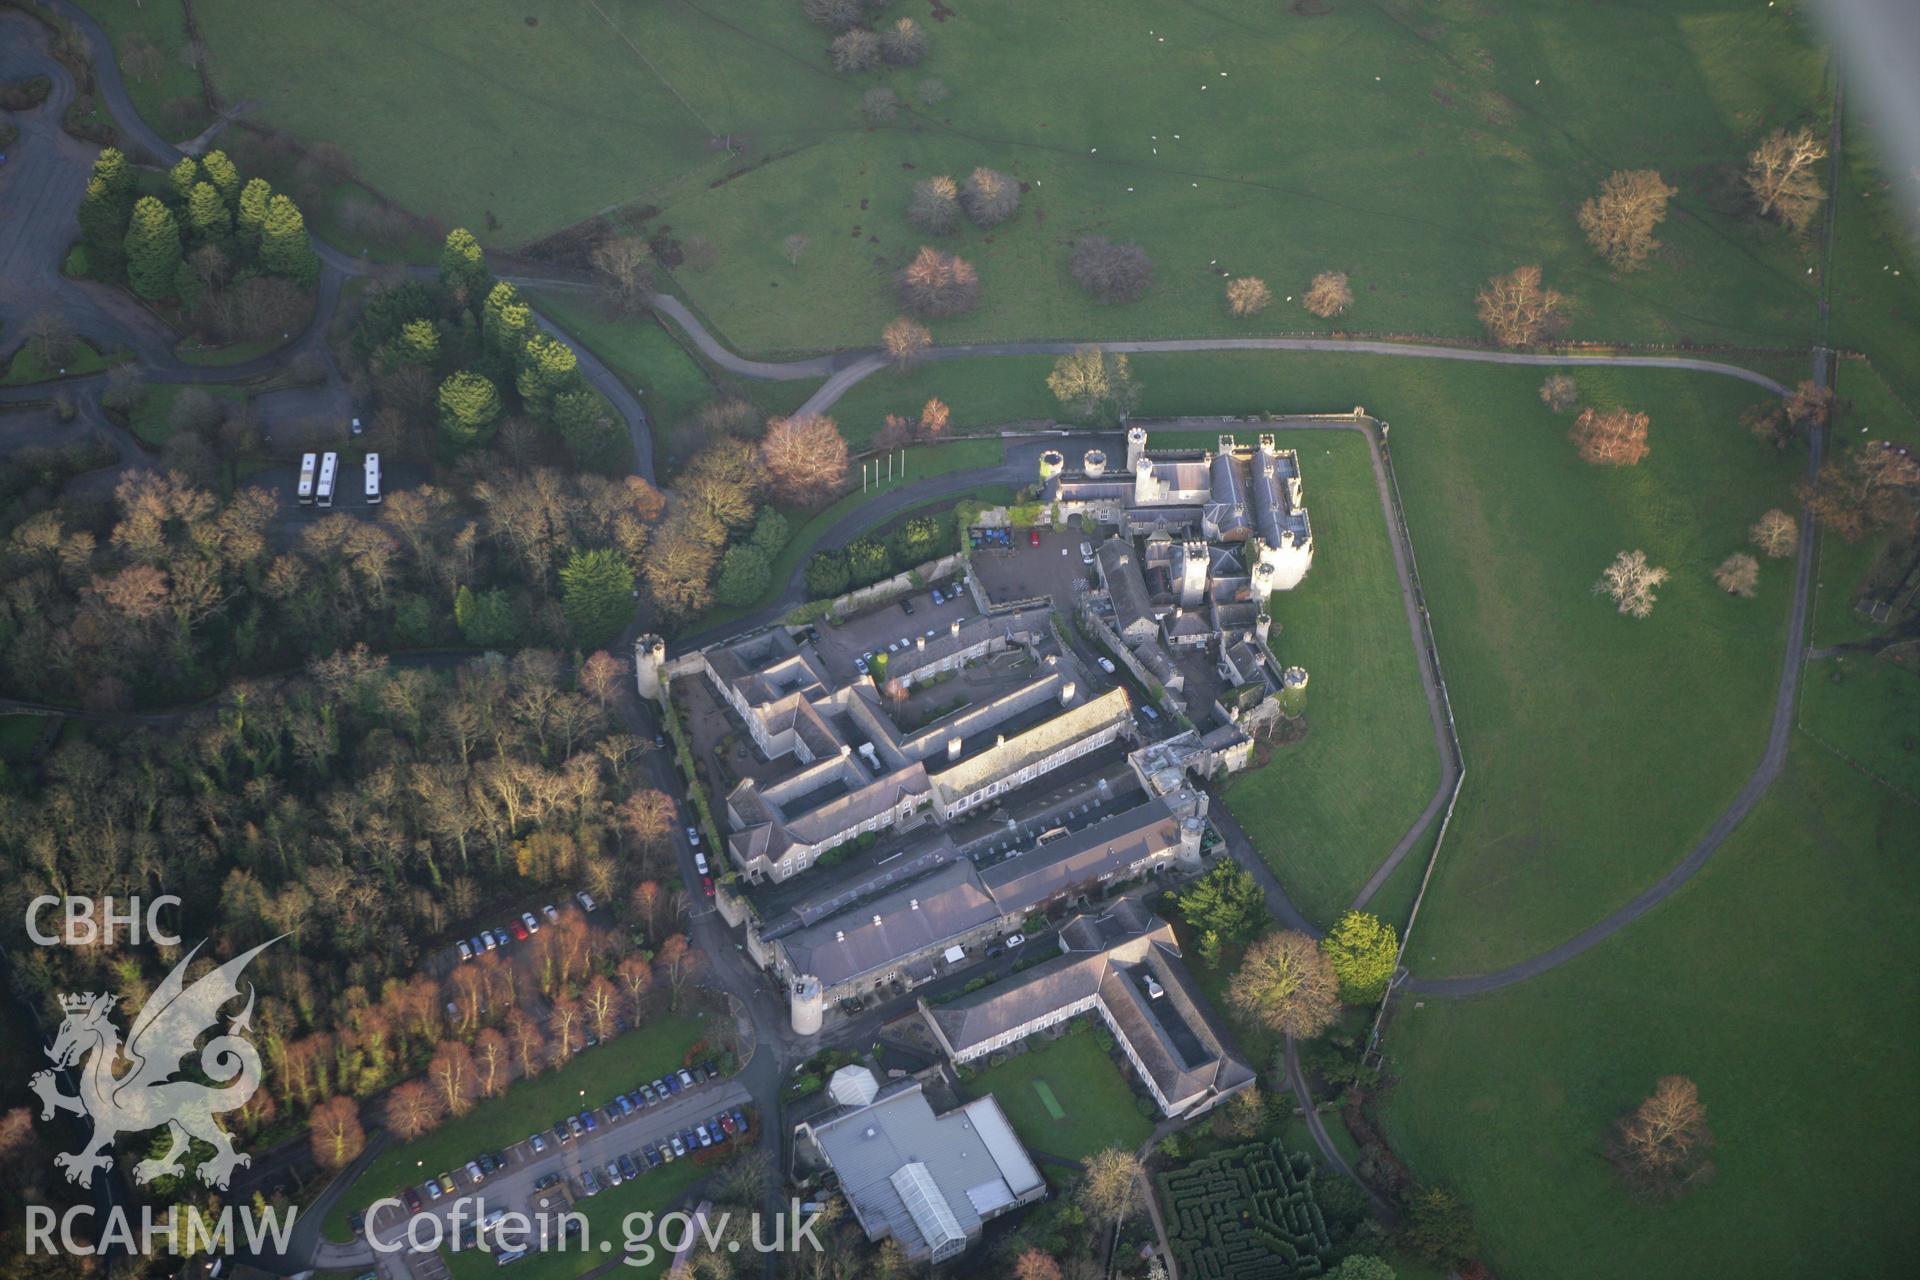 RCAHMW colour oblique aerial photograph of Bodelwyddan Castle. Taken on 10 December 2009 by Toby Driver